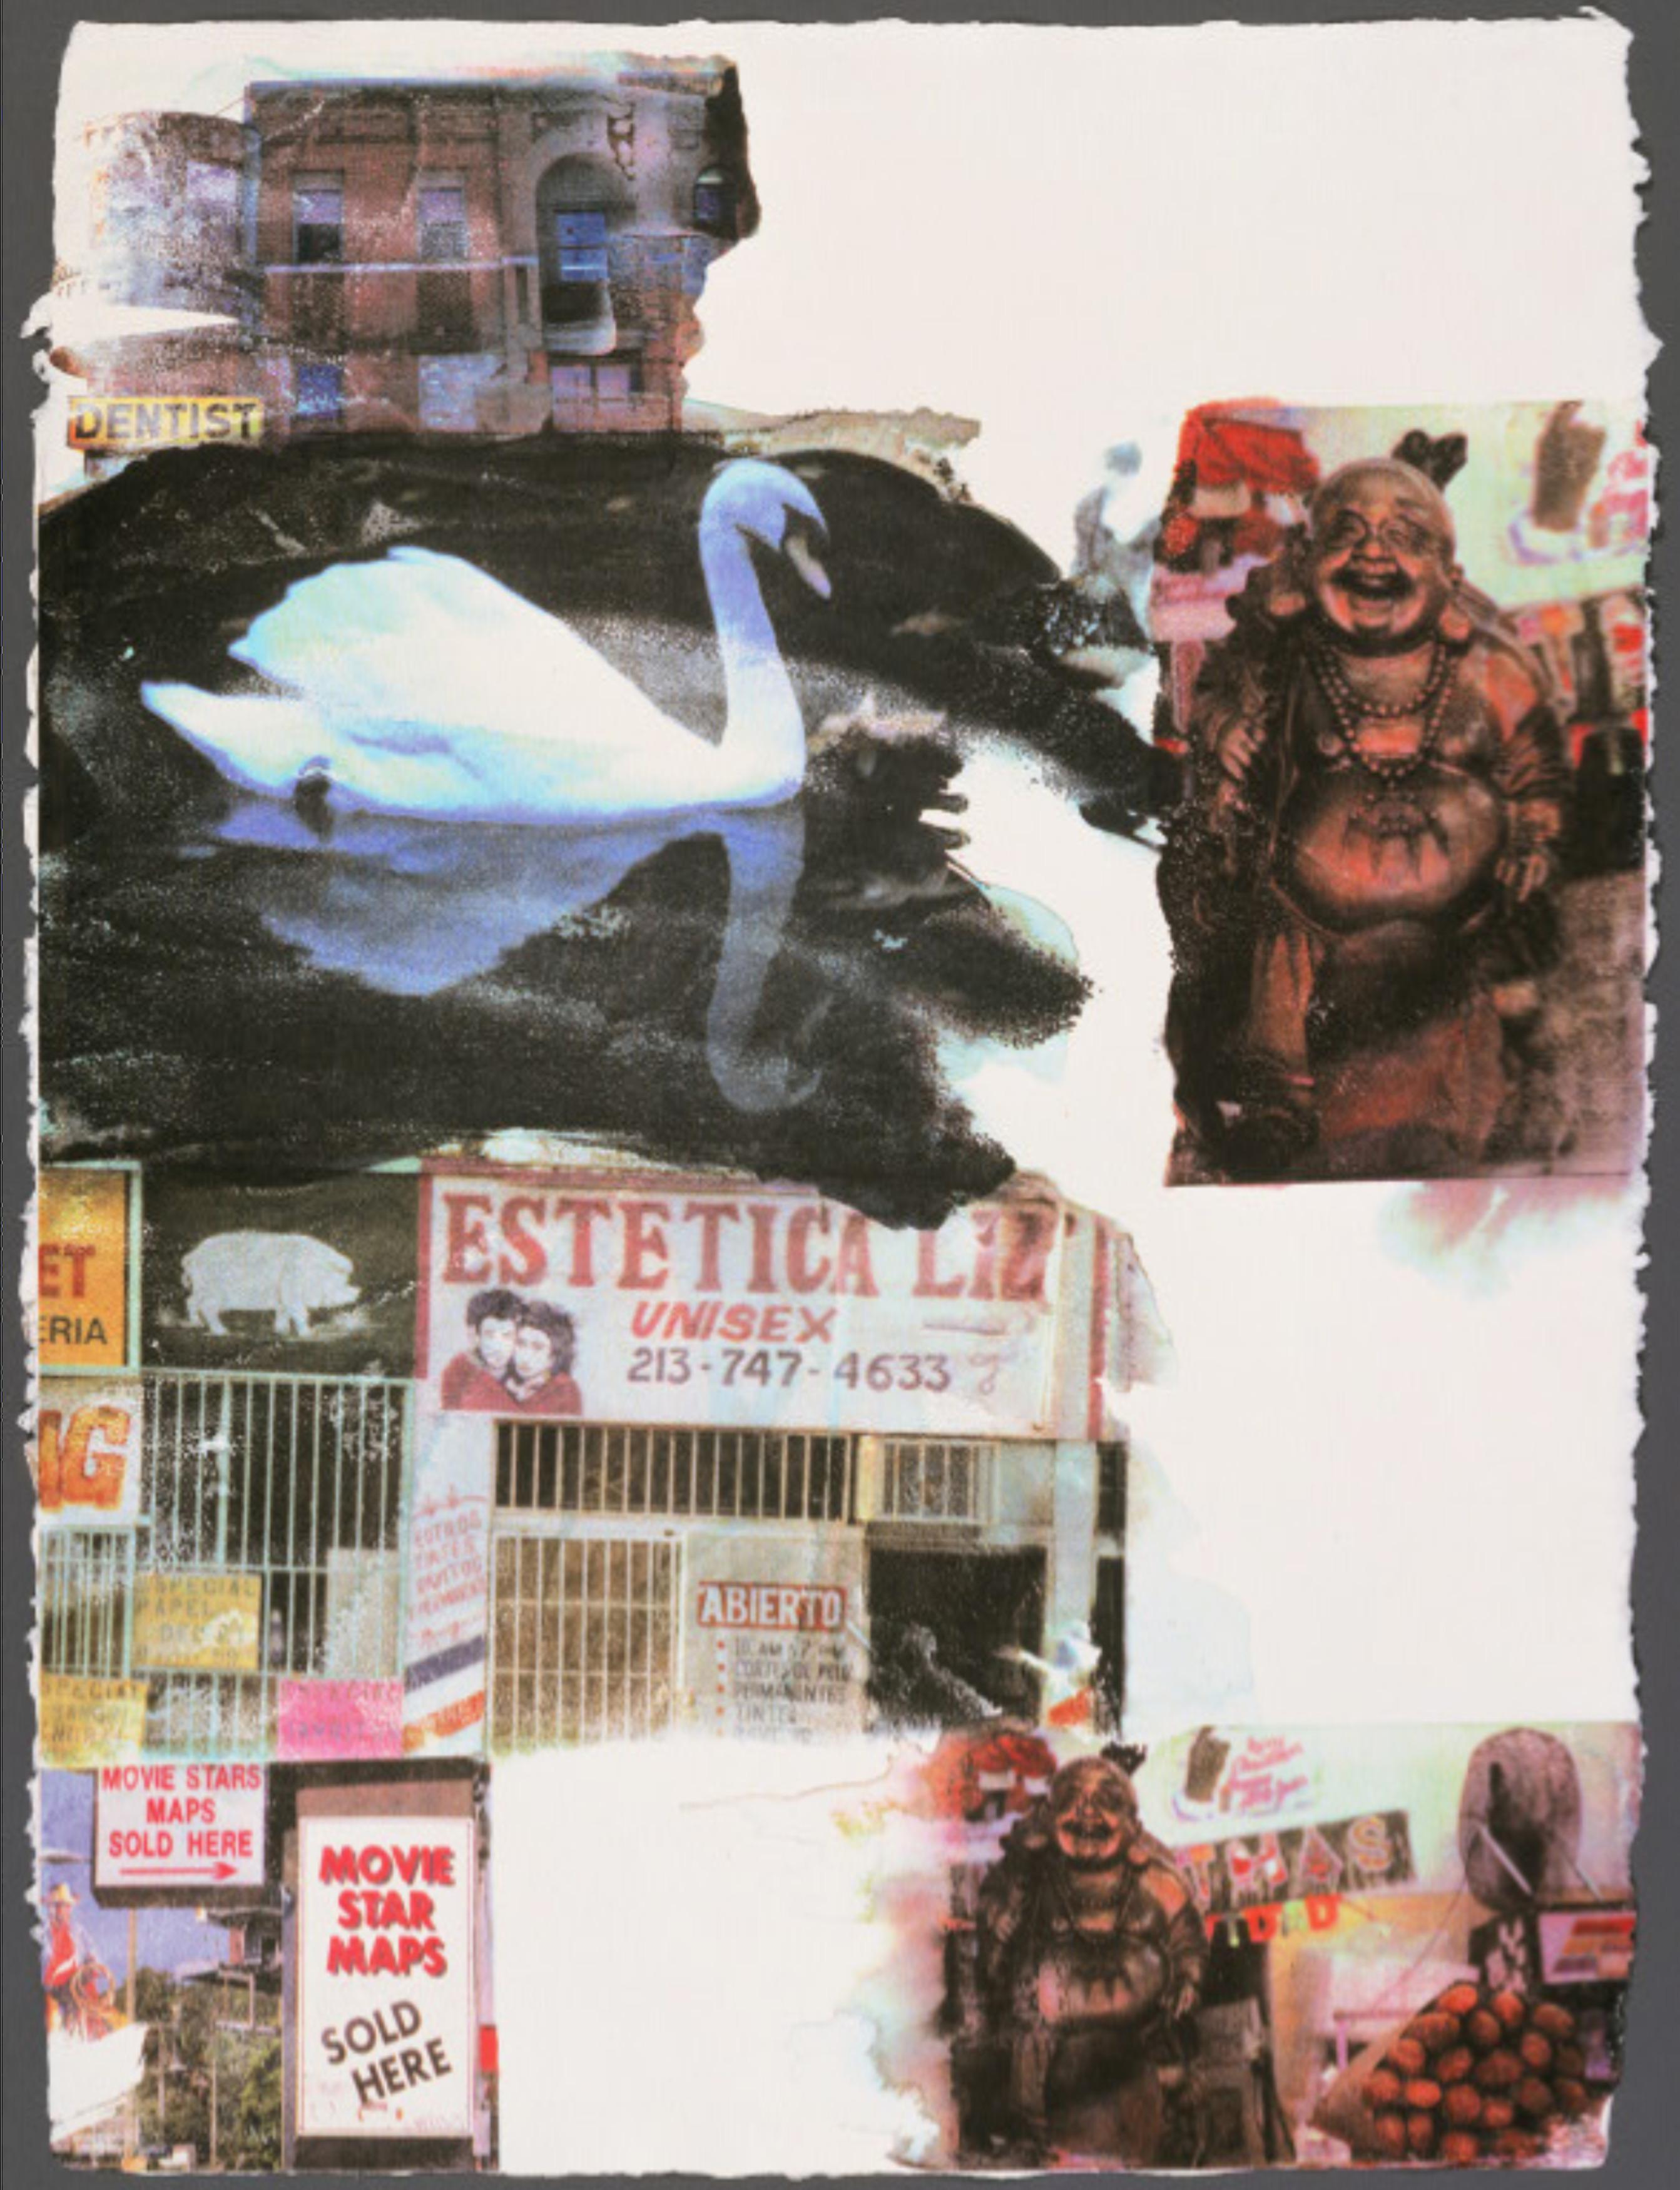 L.A. Uncovered # 7 - Print by Robert Rauschenberg